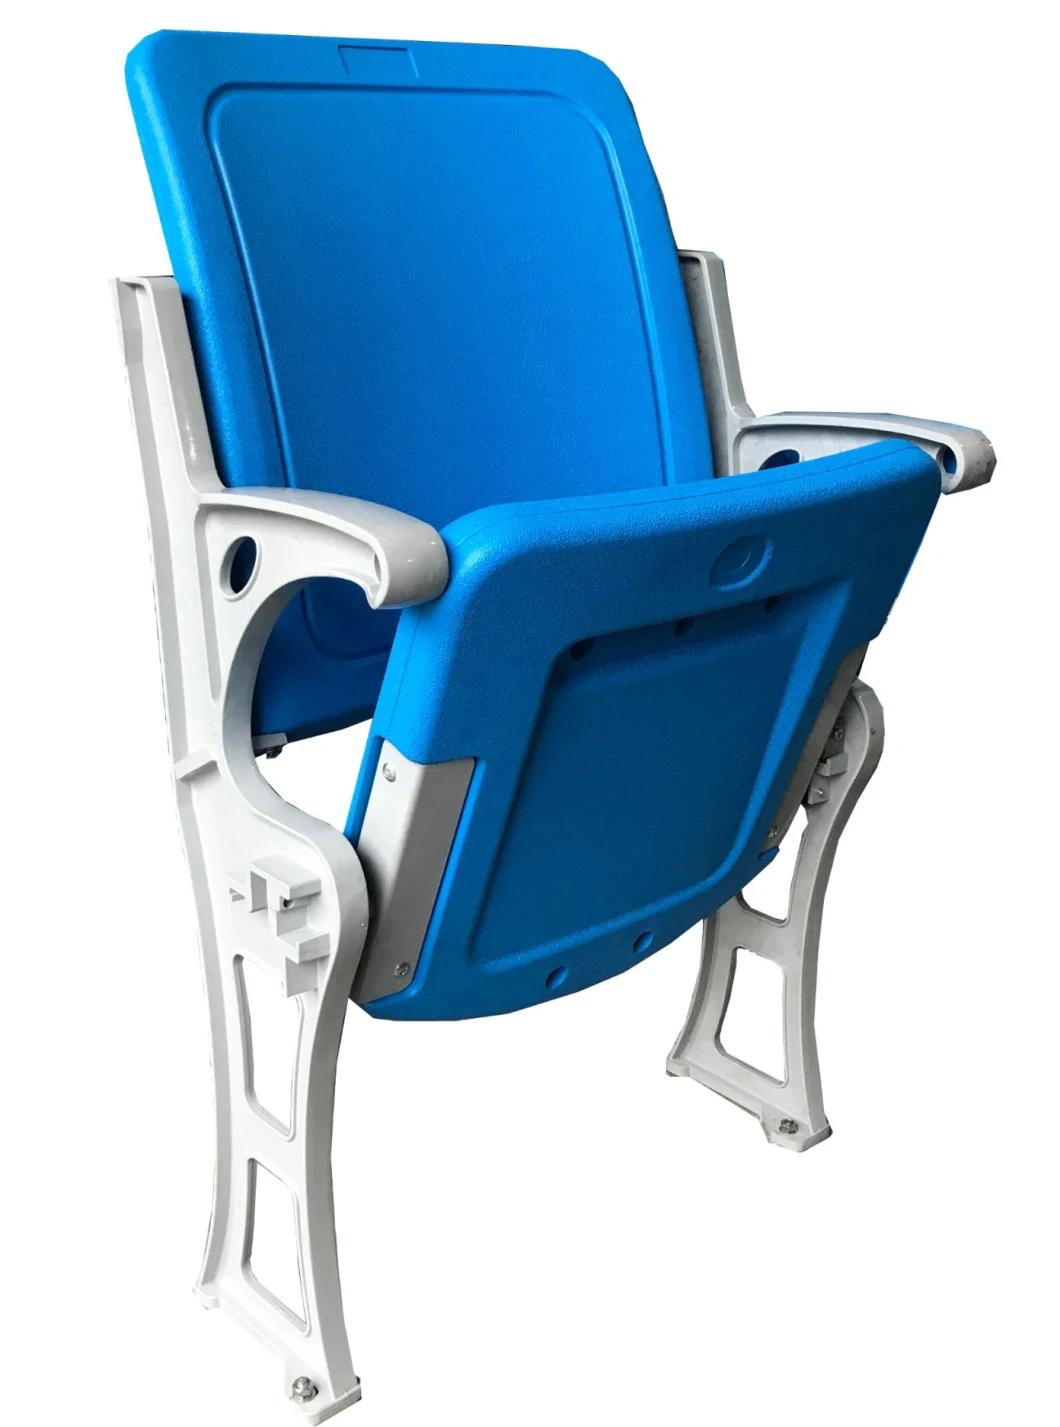 Upholstered Folding Chair for Vvip Area of Stadium, Cushion Seat for Stadium